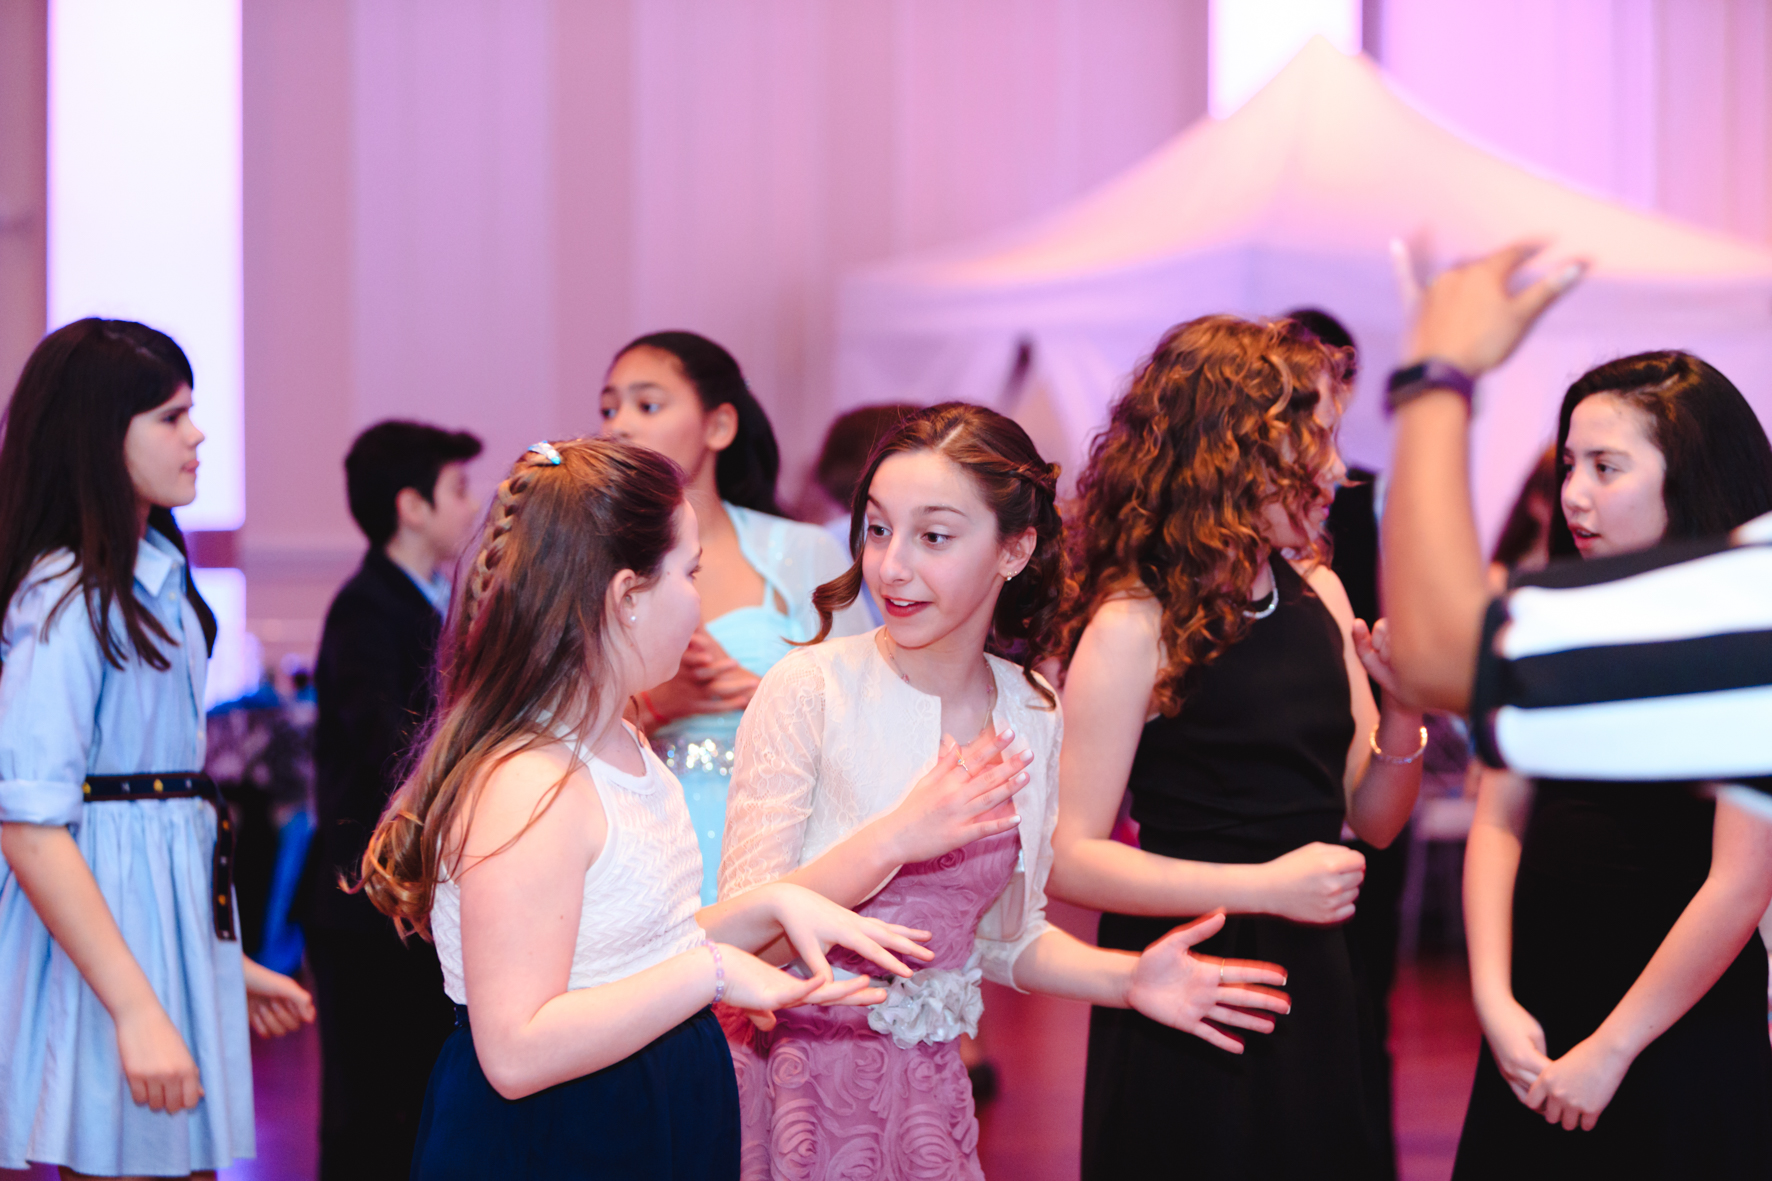 Bar / Bat Mitzvah shooting with best photographers and professional videographers team – VIO IMAGE